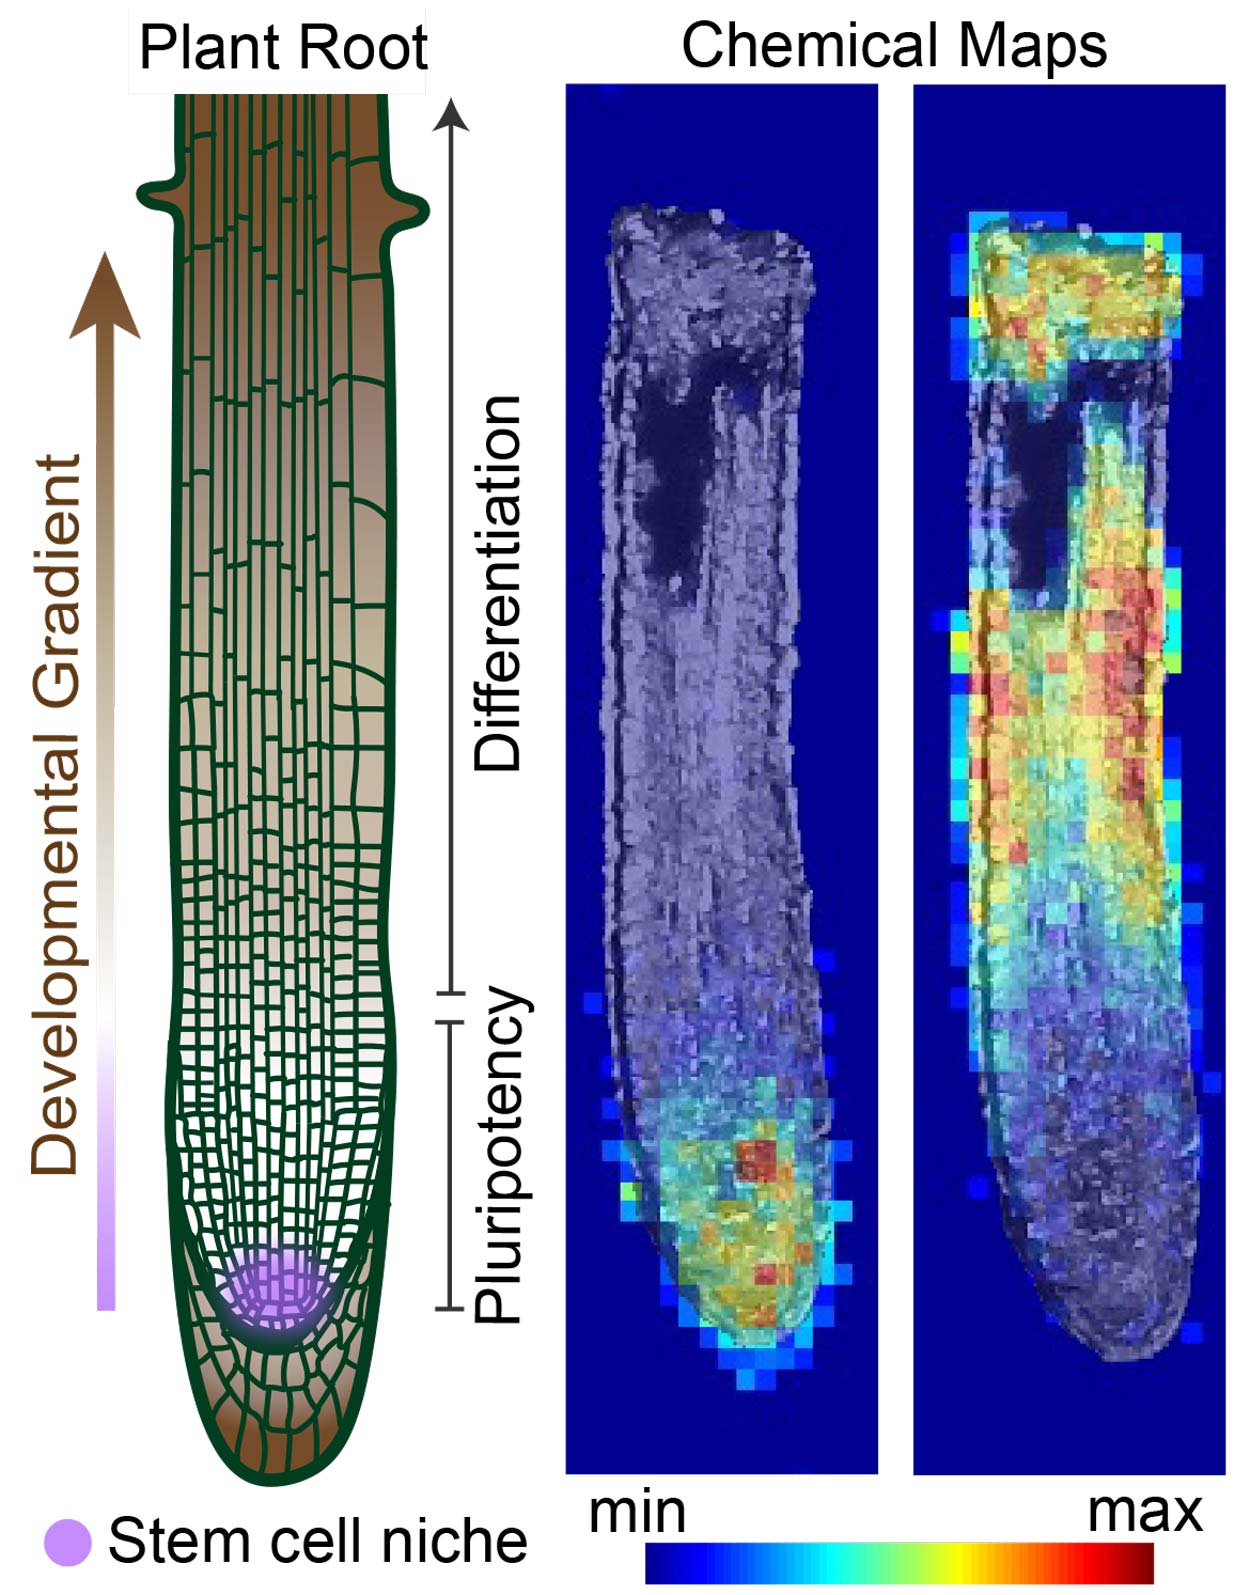 Graphic figure showing root development (left) and a heat graph of chemical imaging (right)